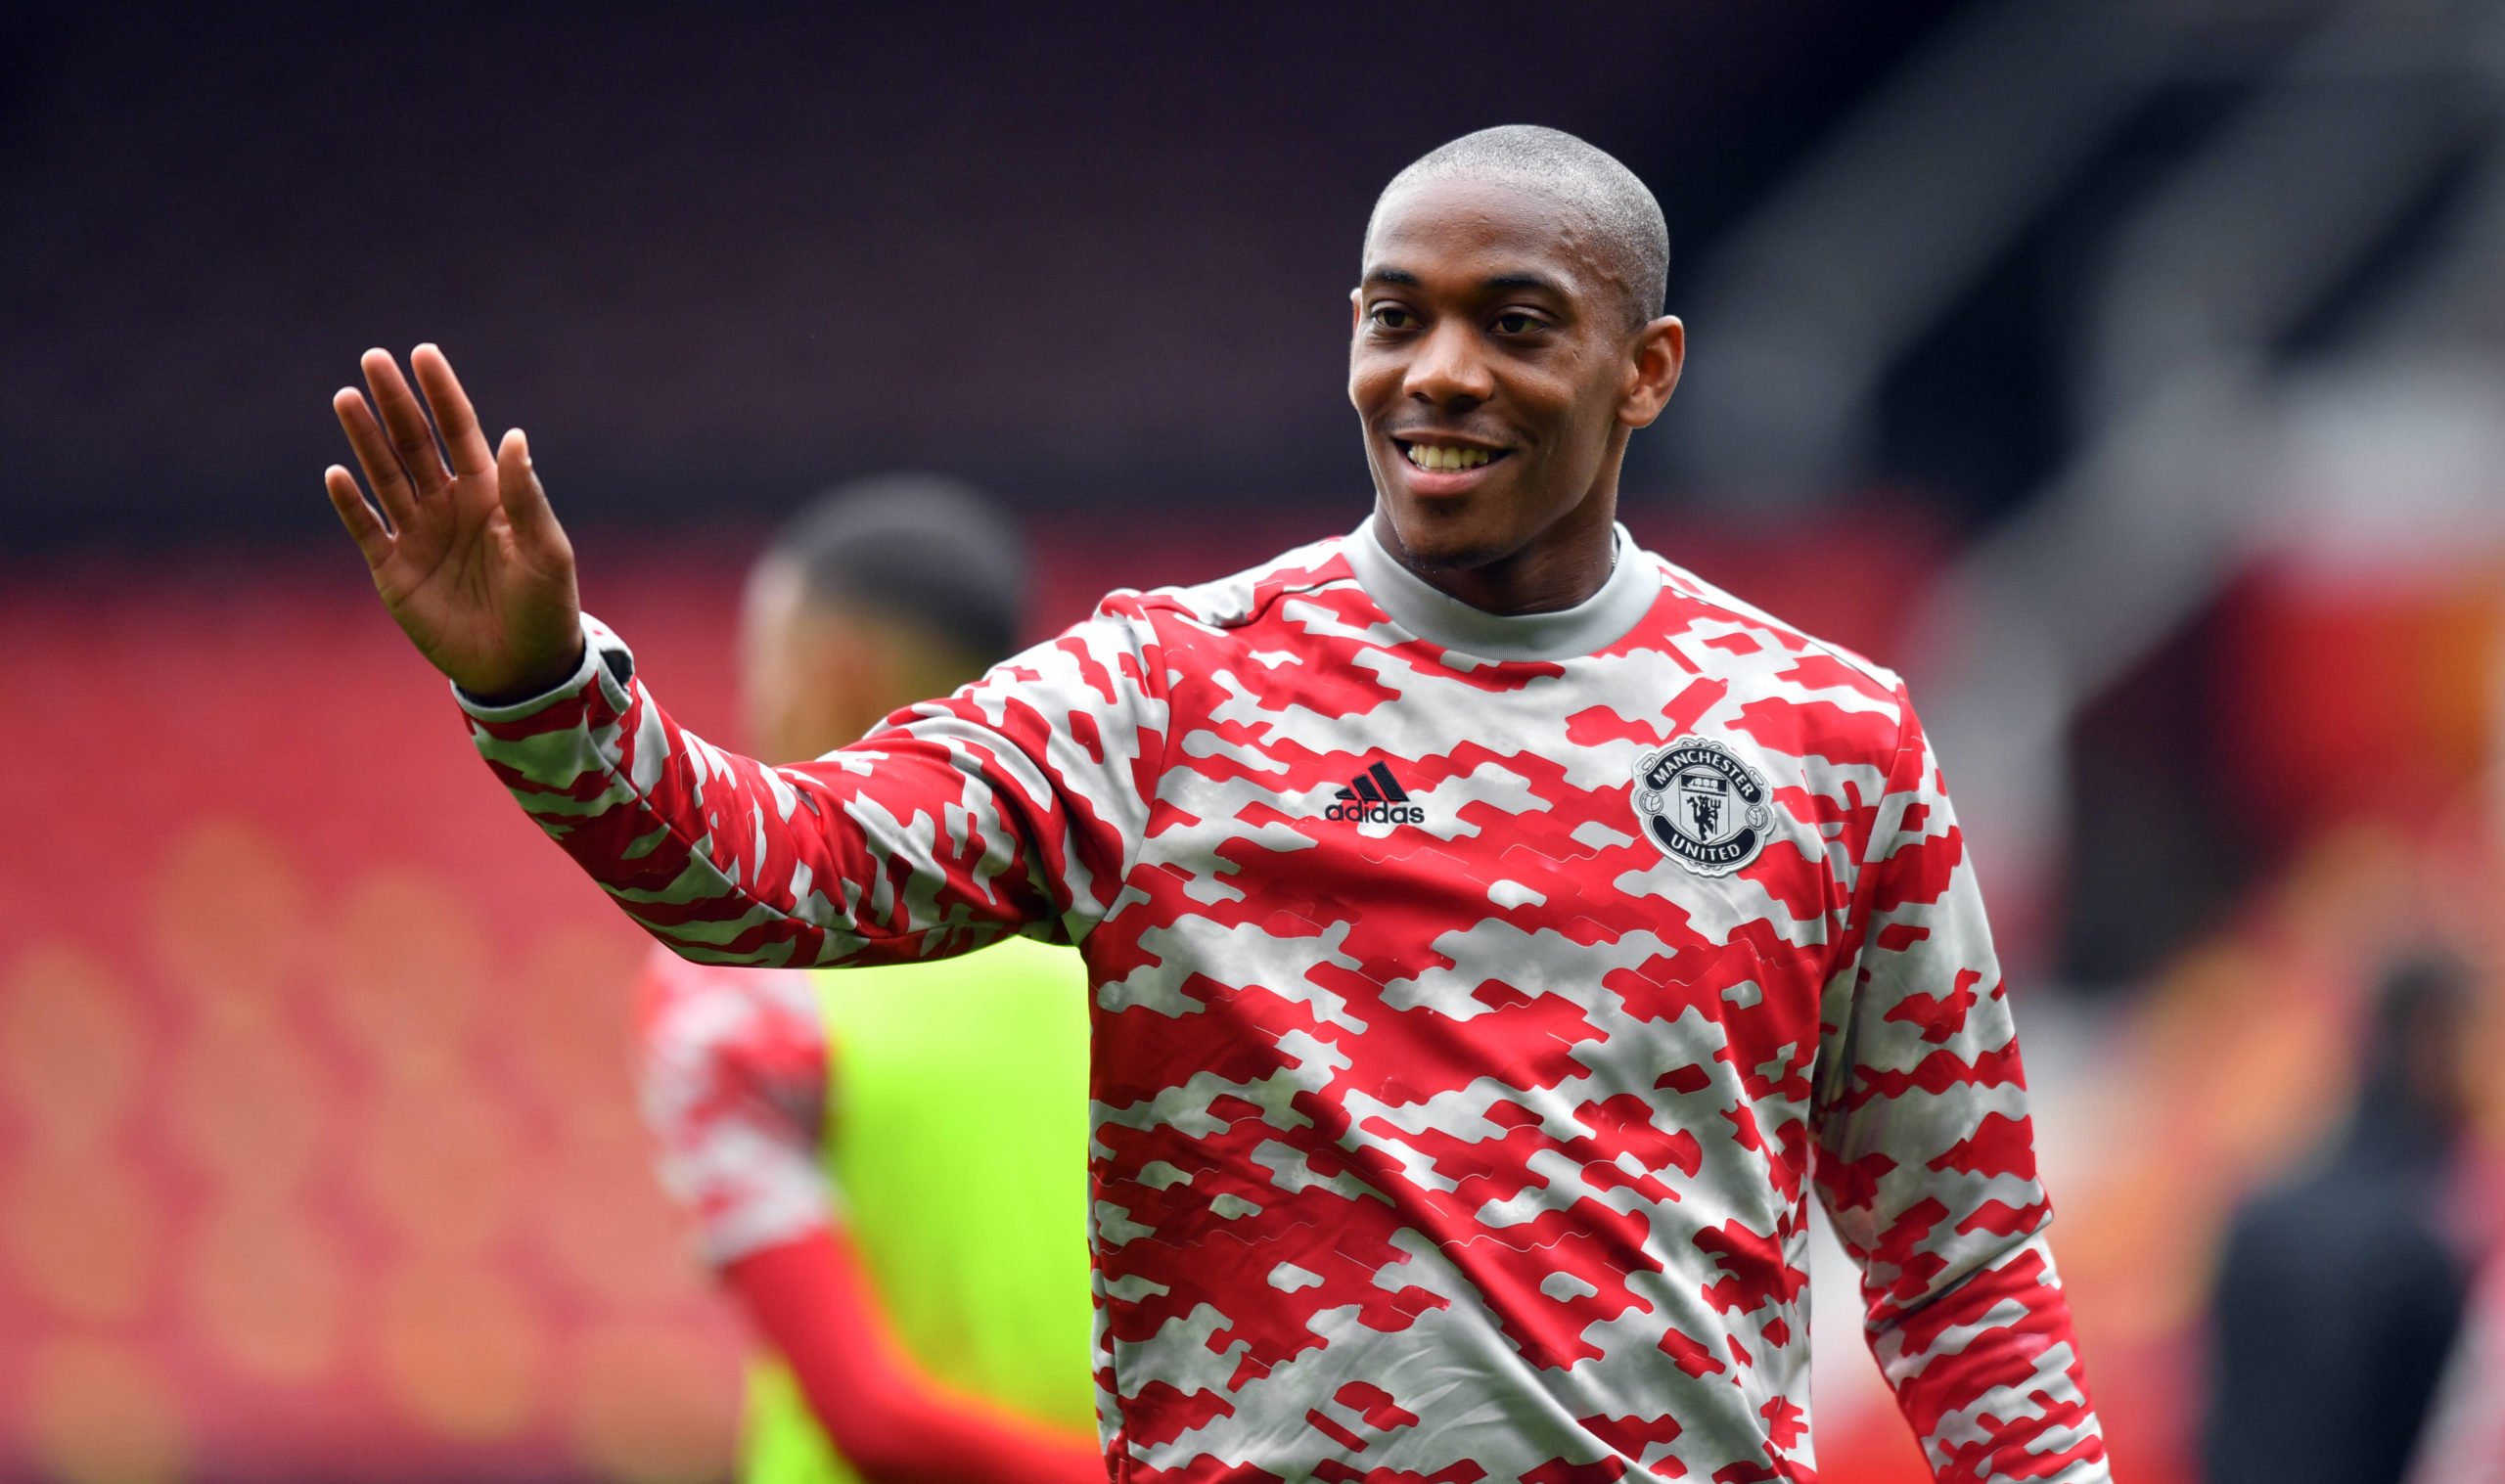 Inter Identify Anthony Martial As Lukaku Replacement (Anthony Martial can be seen in the picture)